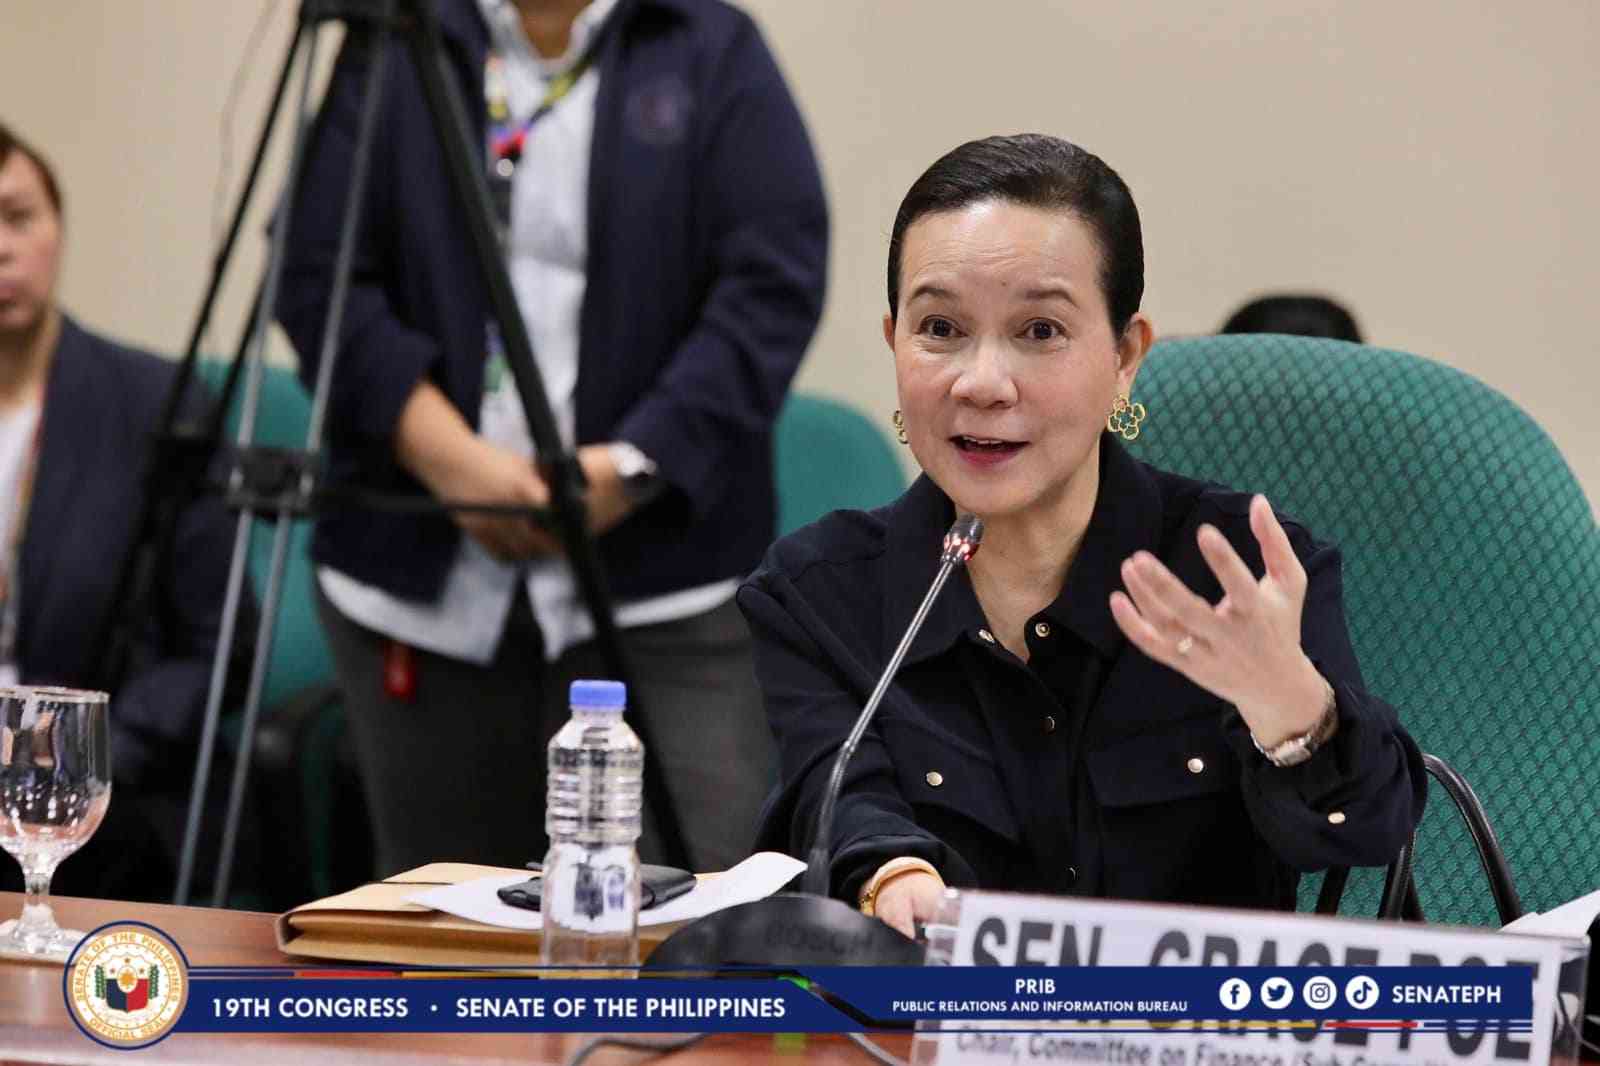 Poe on Aplasca's resignation: ‘OTS must improve its system’